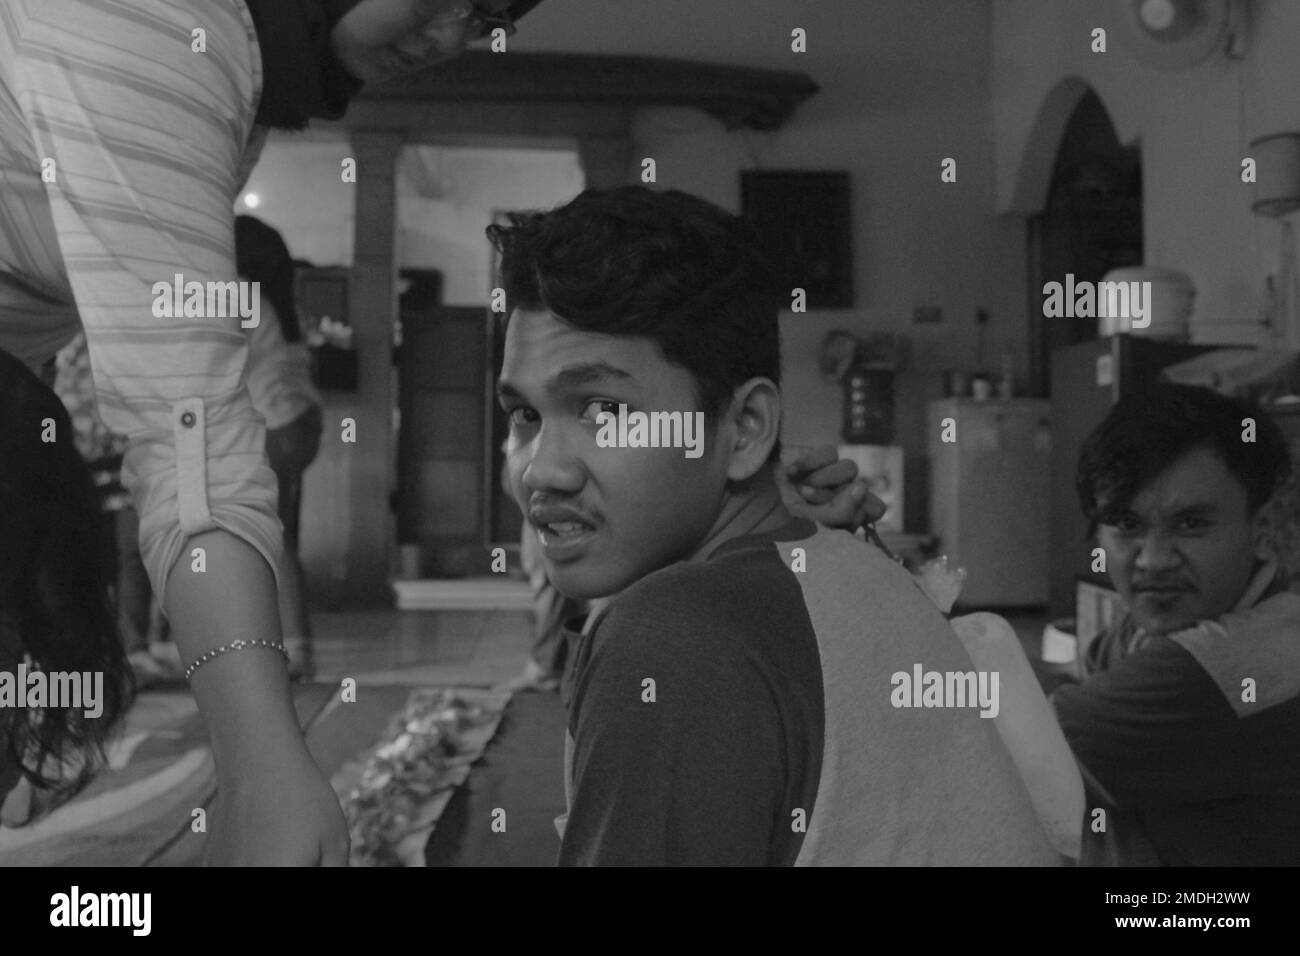 Jakarta, Indonesia - 02 24 2020: black and white photo of strange facial expressions of a boy hanging out with his friends Stock Photo